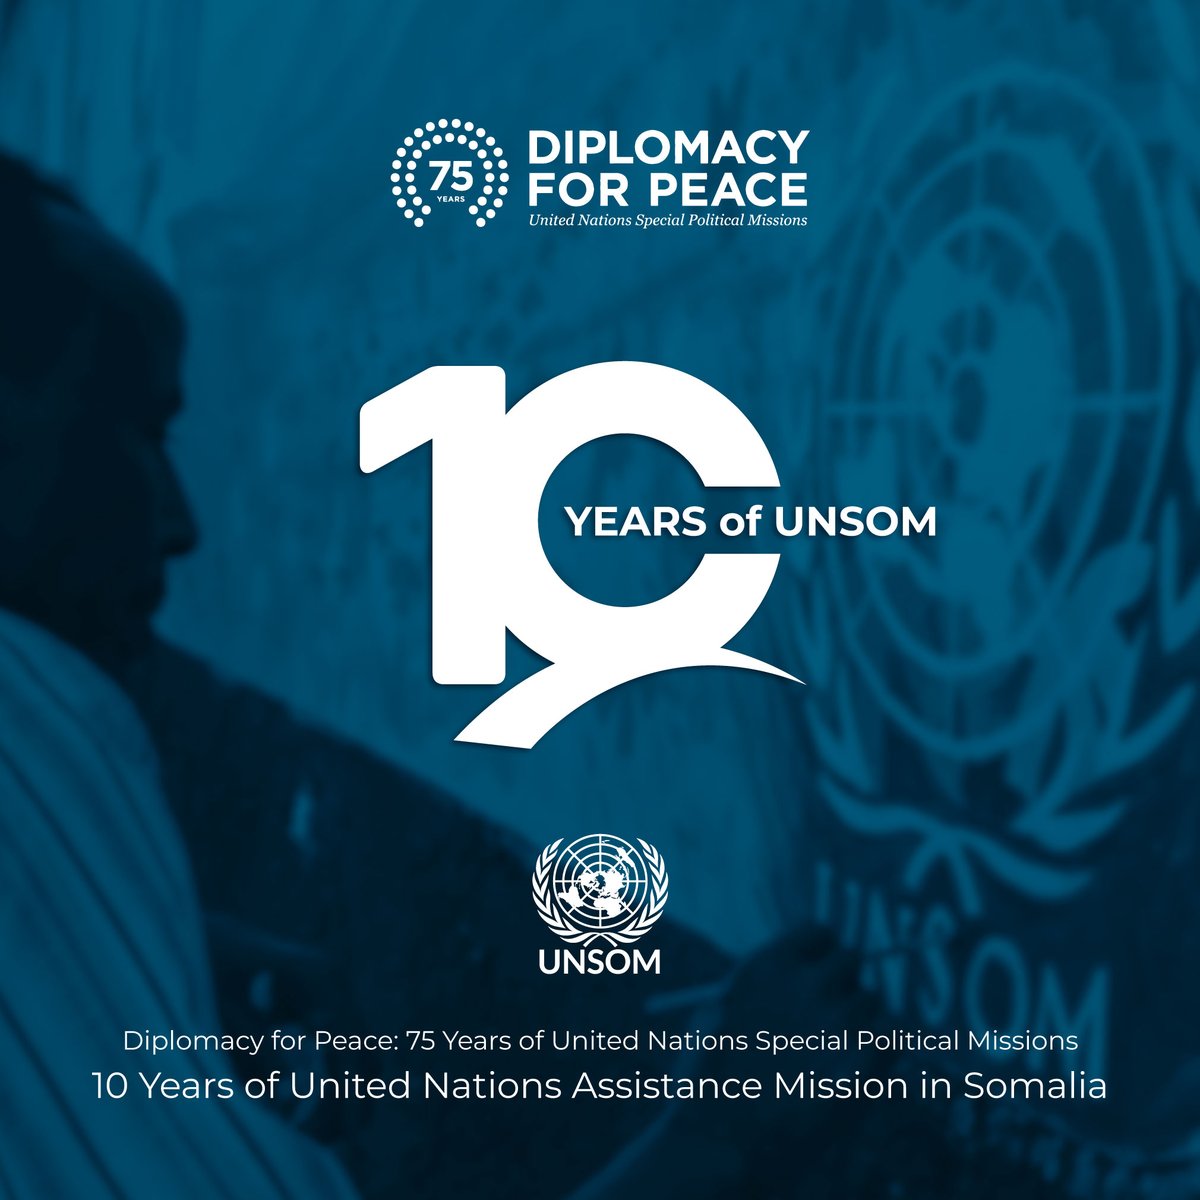 On the 10th anniversary of its establishment by the #UNSC in 2013, @UNSomalia takes the opportunity to reaffirm its unwavering commitment to supporting #Somalia with its state- and #peace-building, #security and #development efforts. 

#DiplomacyforPeace